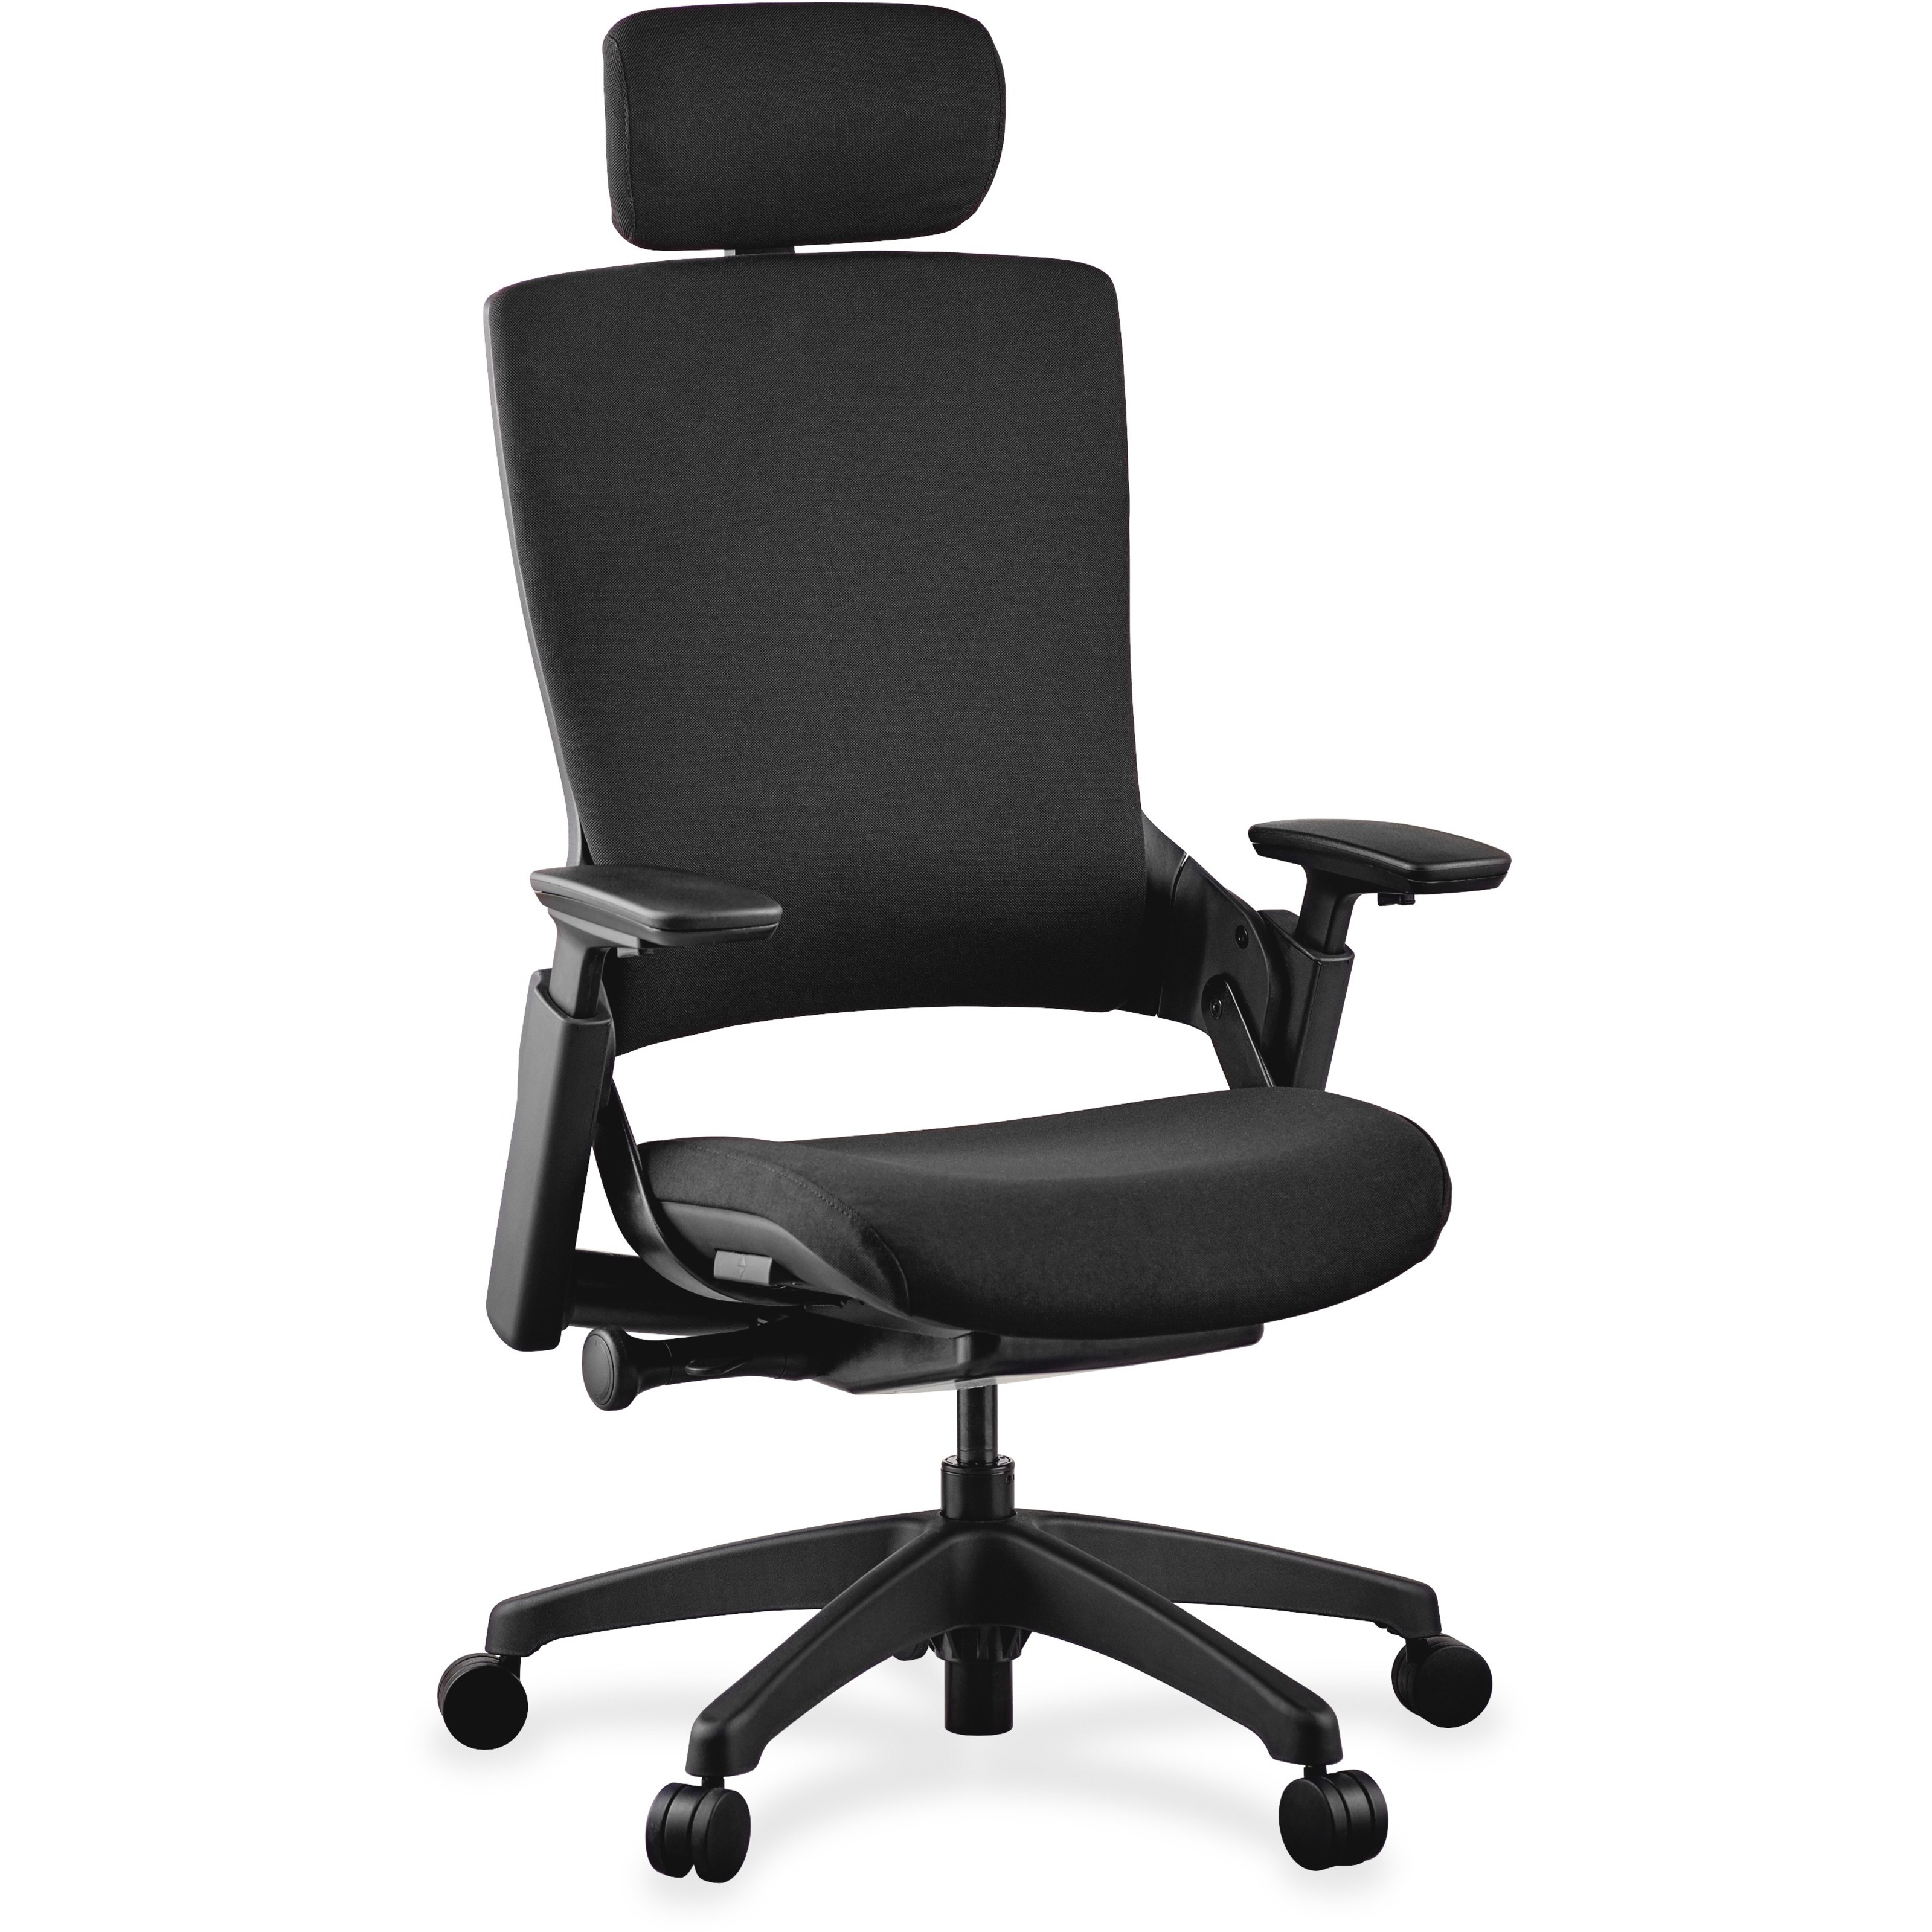 Lorell, Executive High-Back Chairs Headrest, 1 Each, Black - image 3 of 4